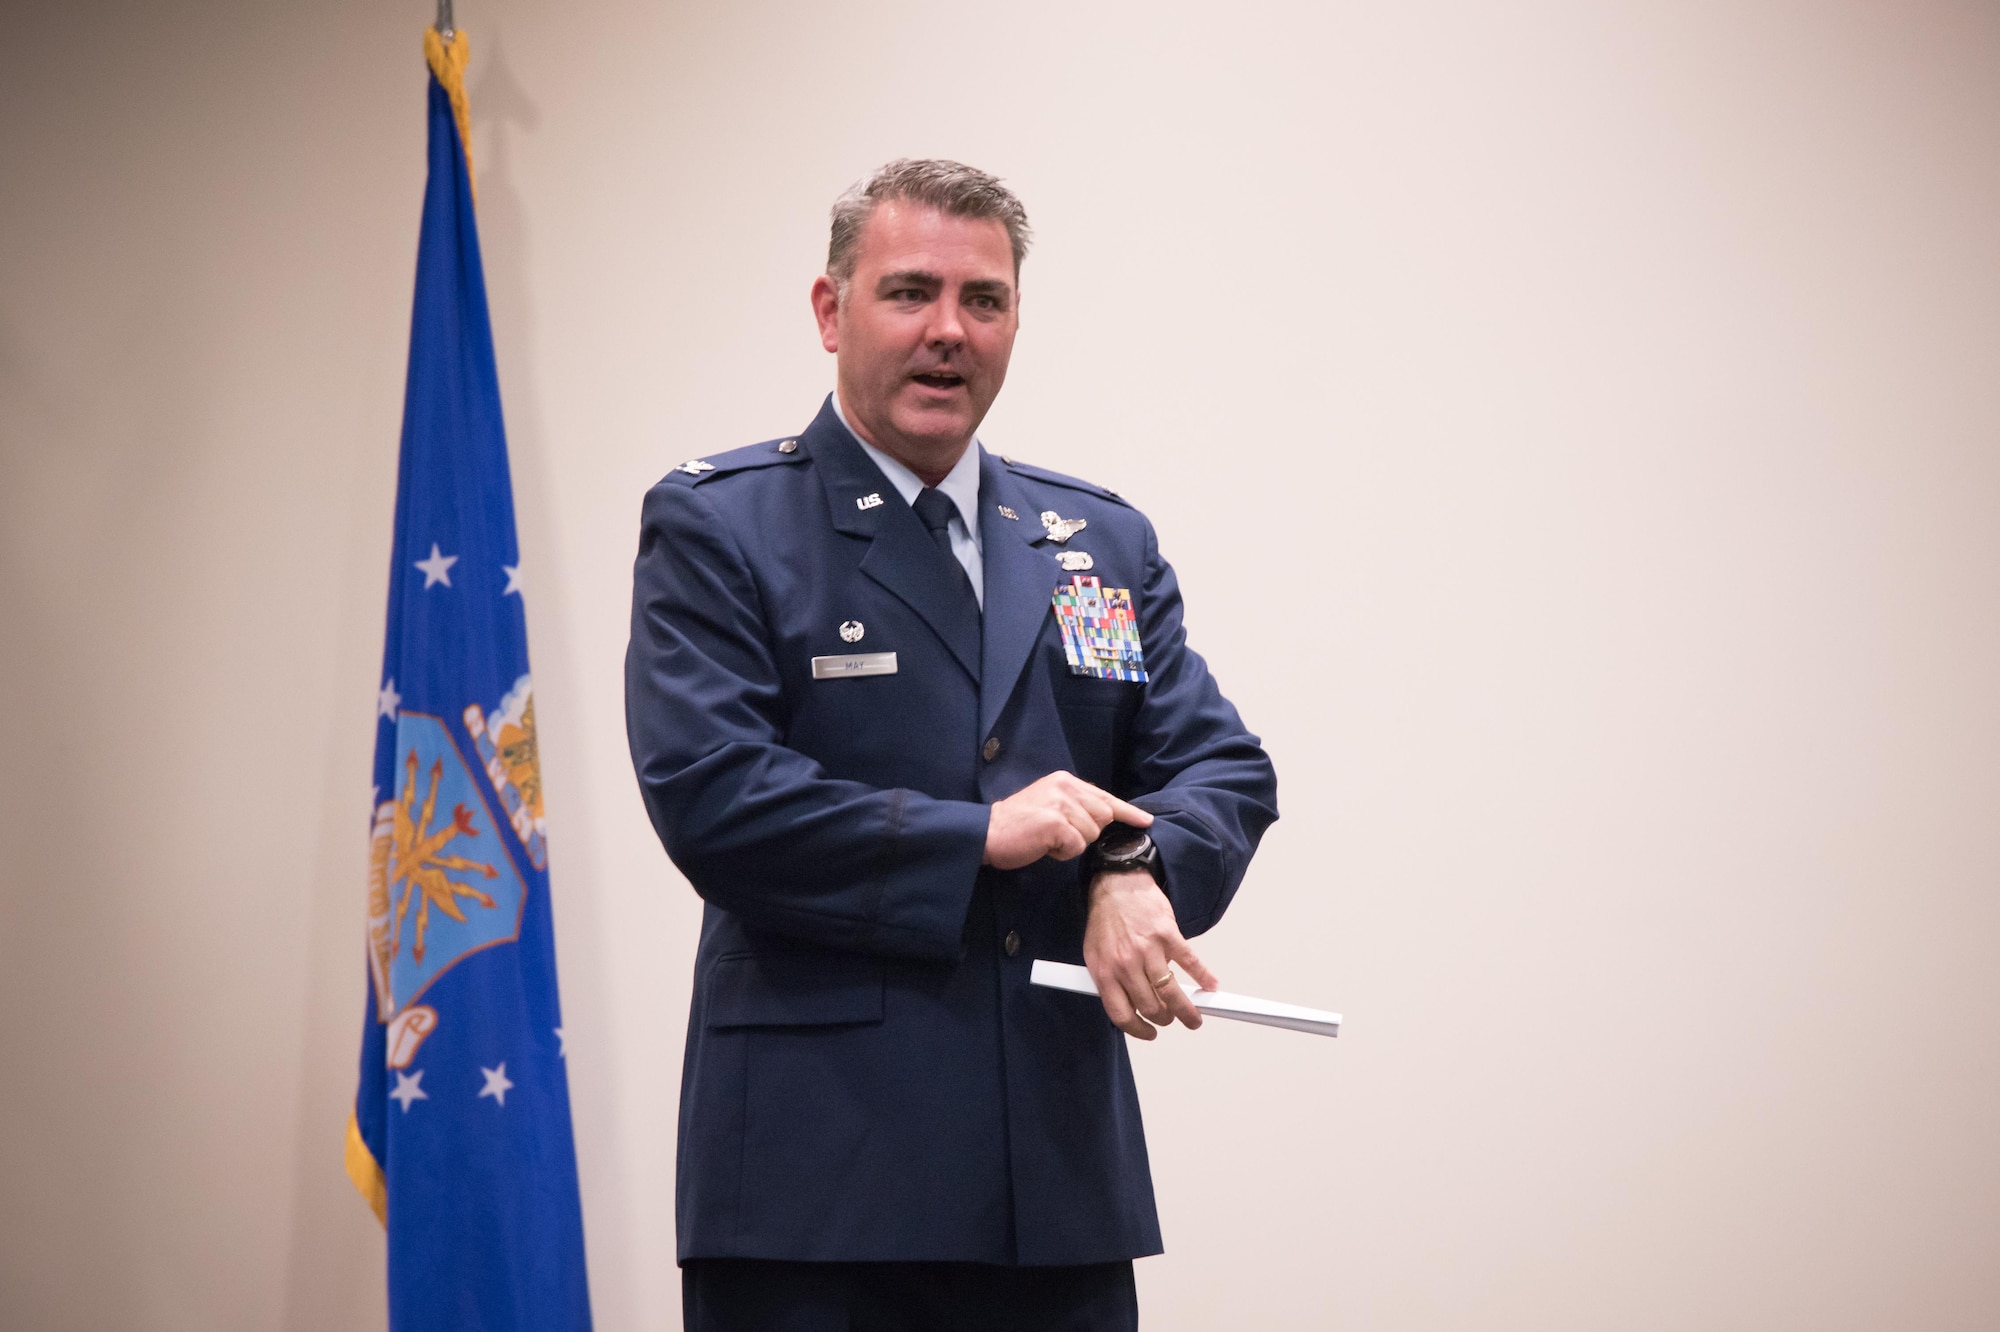 Col. Brian May, 403rd Operations Group commander speaks about the importance of trusting his people during his promotion ceremony March 4, 2017 at Keesler Air Force Base, Mississippi. (U.S. Air Force photo/Staff Sgt. Heather Heiney)